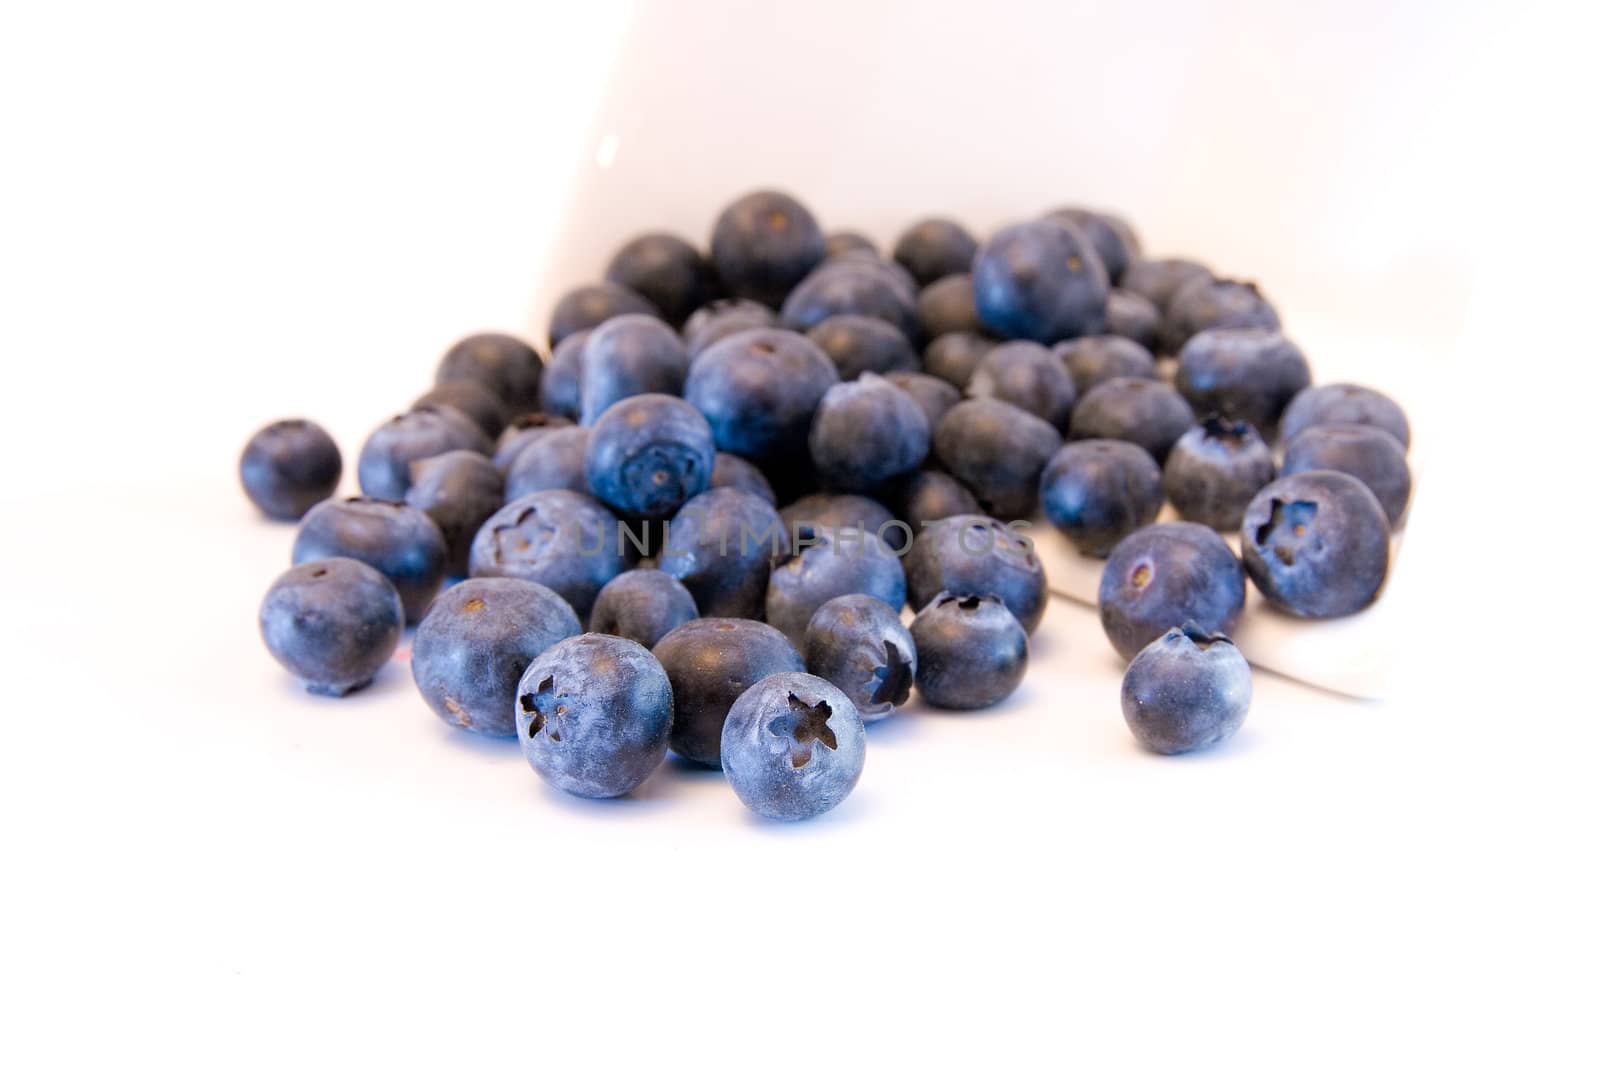 high key image of a collection of blueberries spilling from a white bowl on a white background